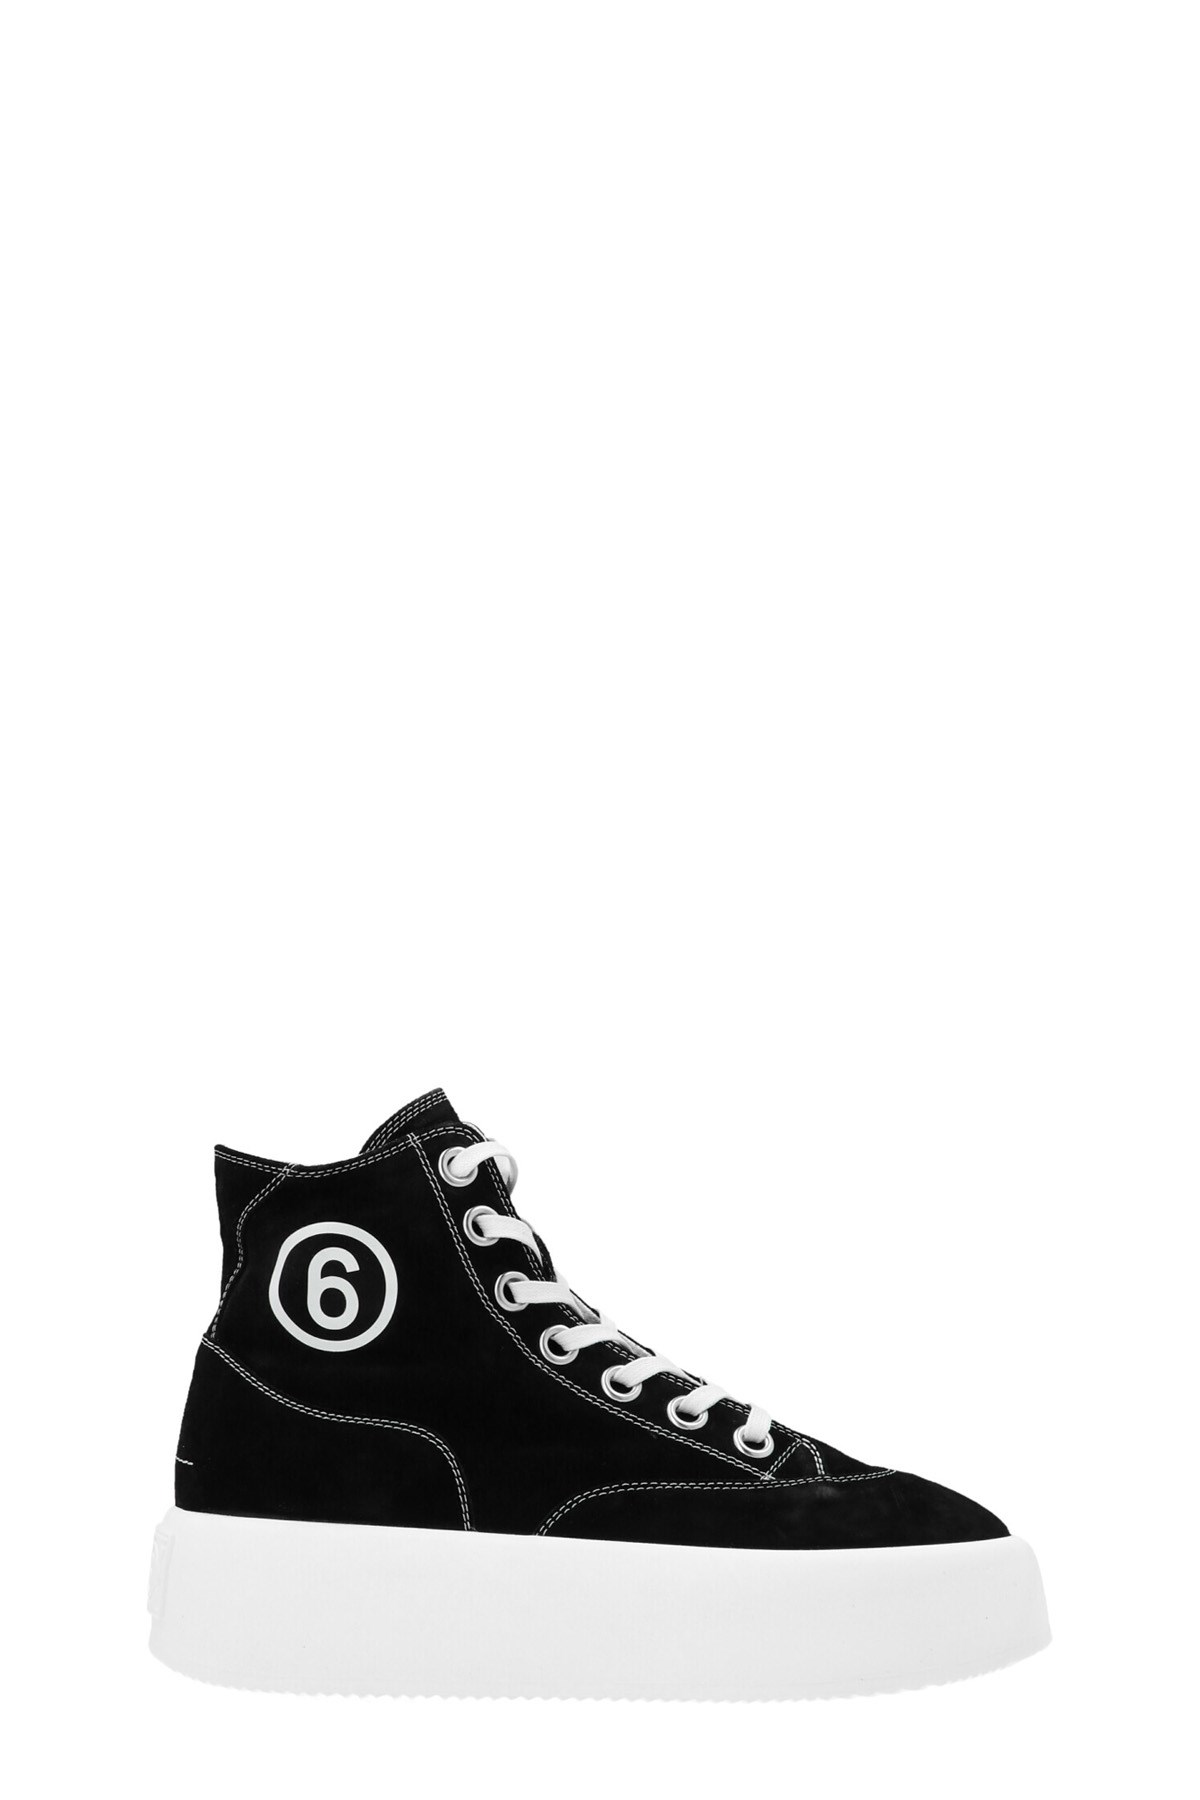 MM6 MAISON MARGIELA High Top Suede Sneakers